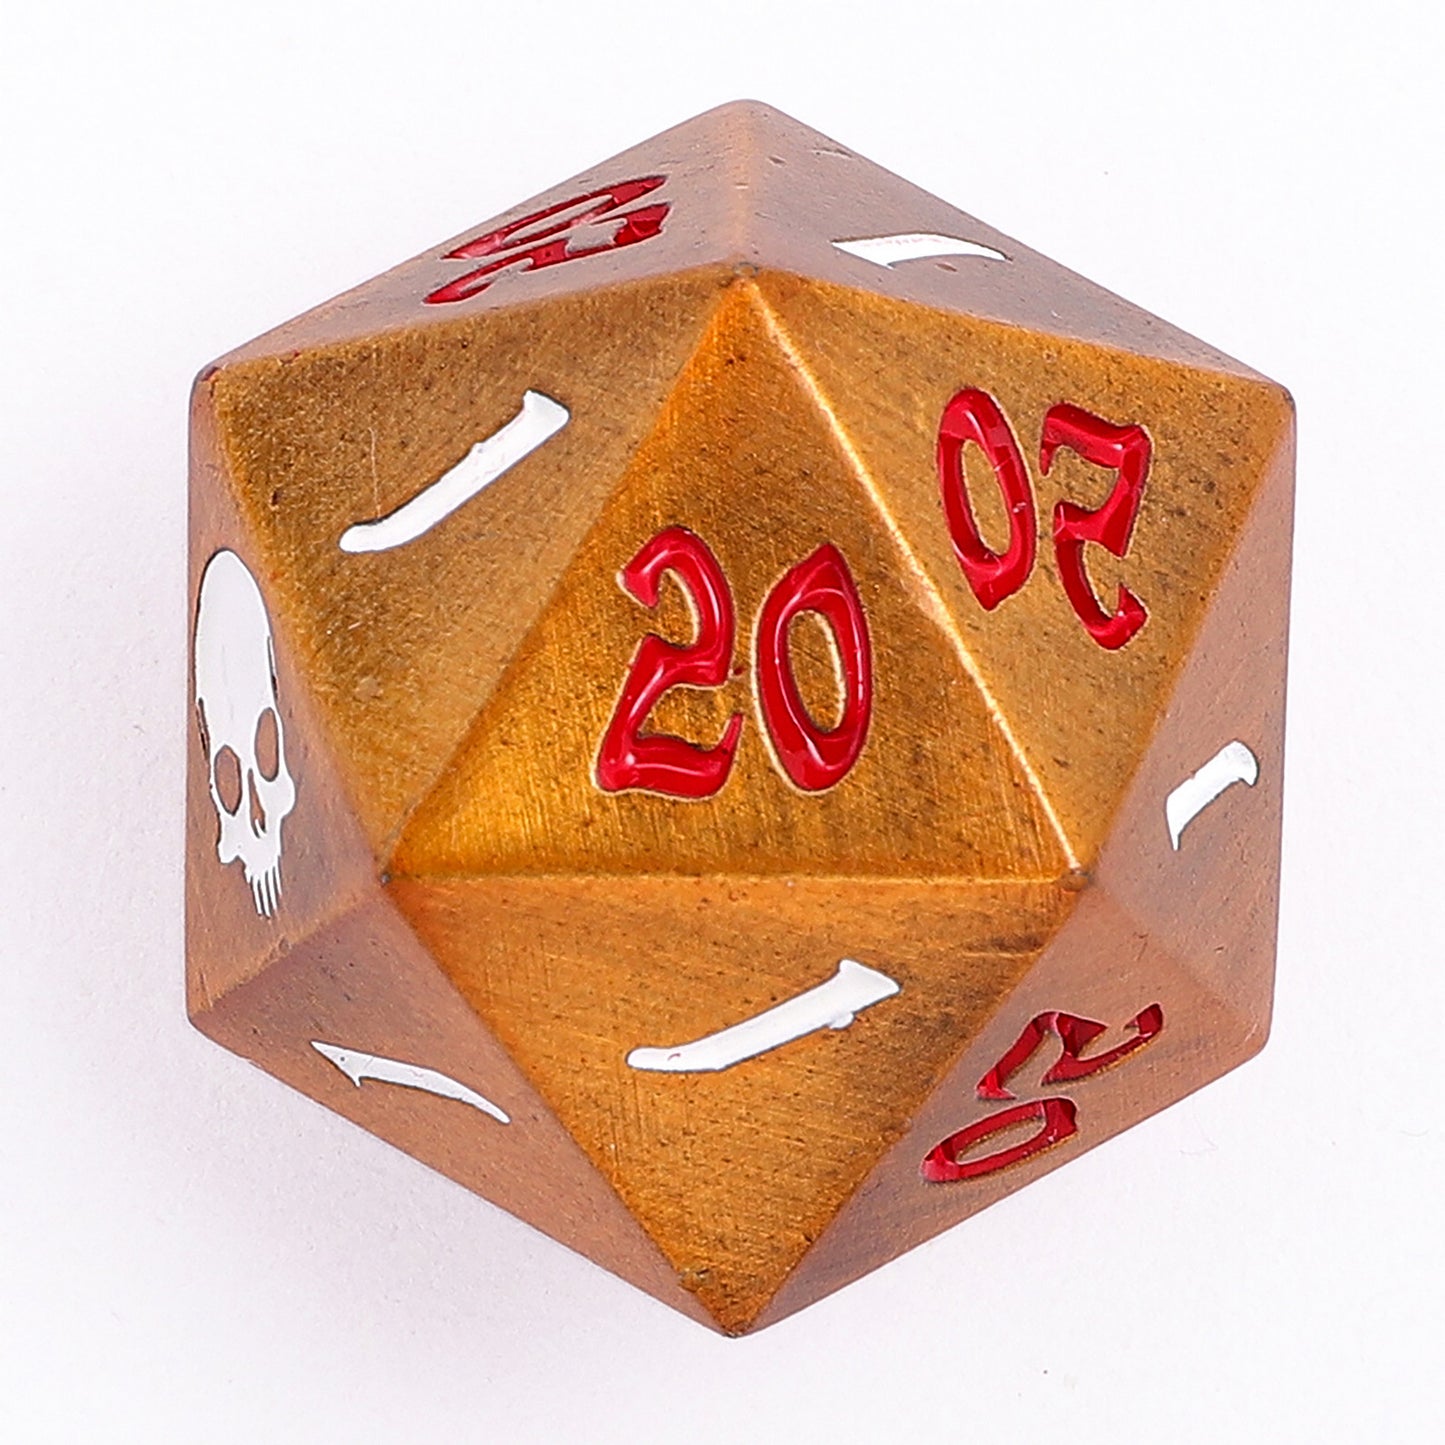 25mm Solid Metal Single D20 The Critical Dice -Ancient Gold